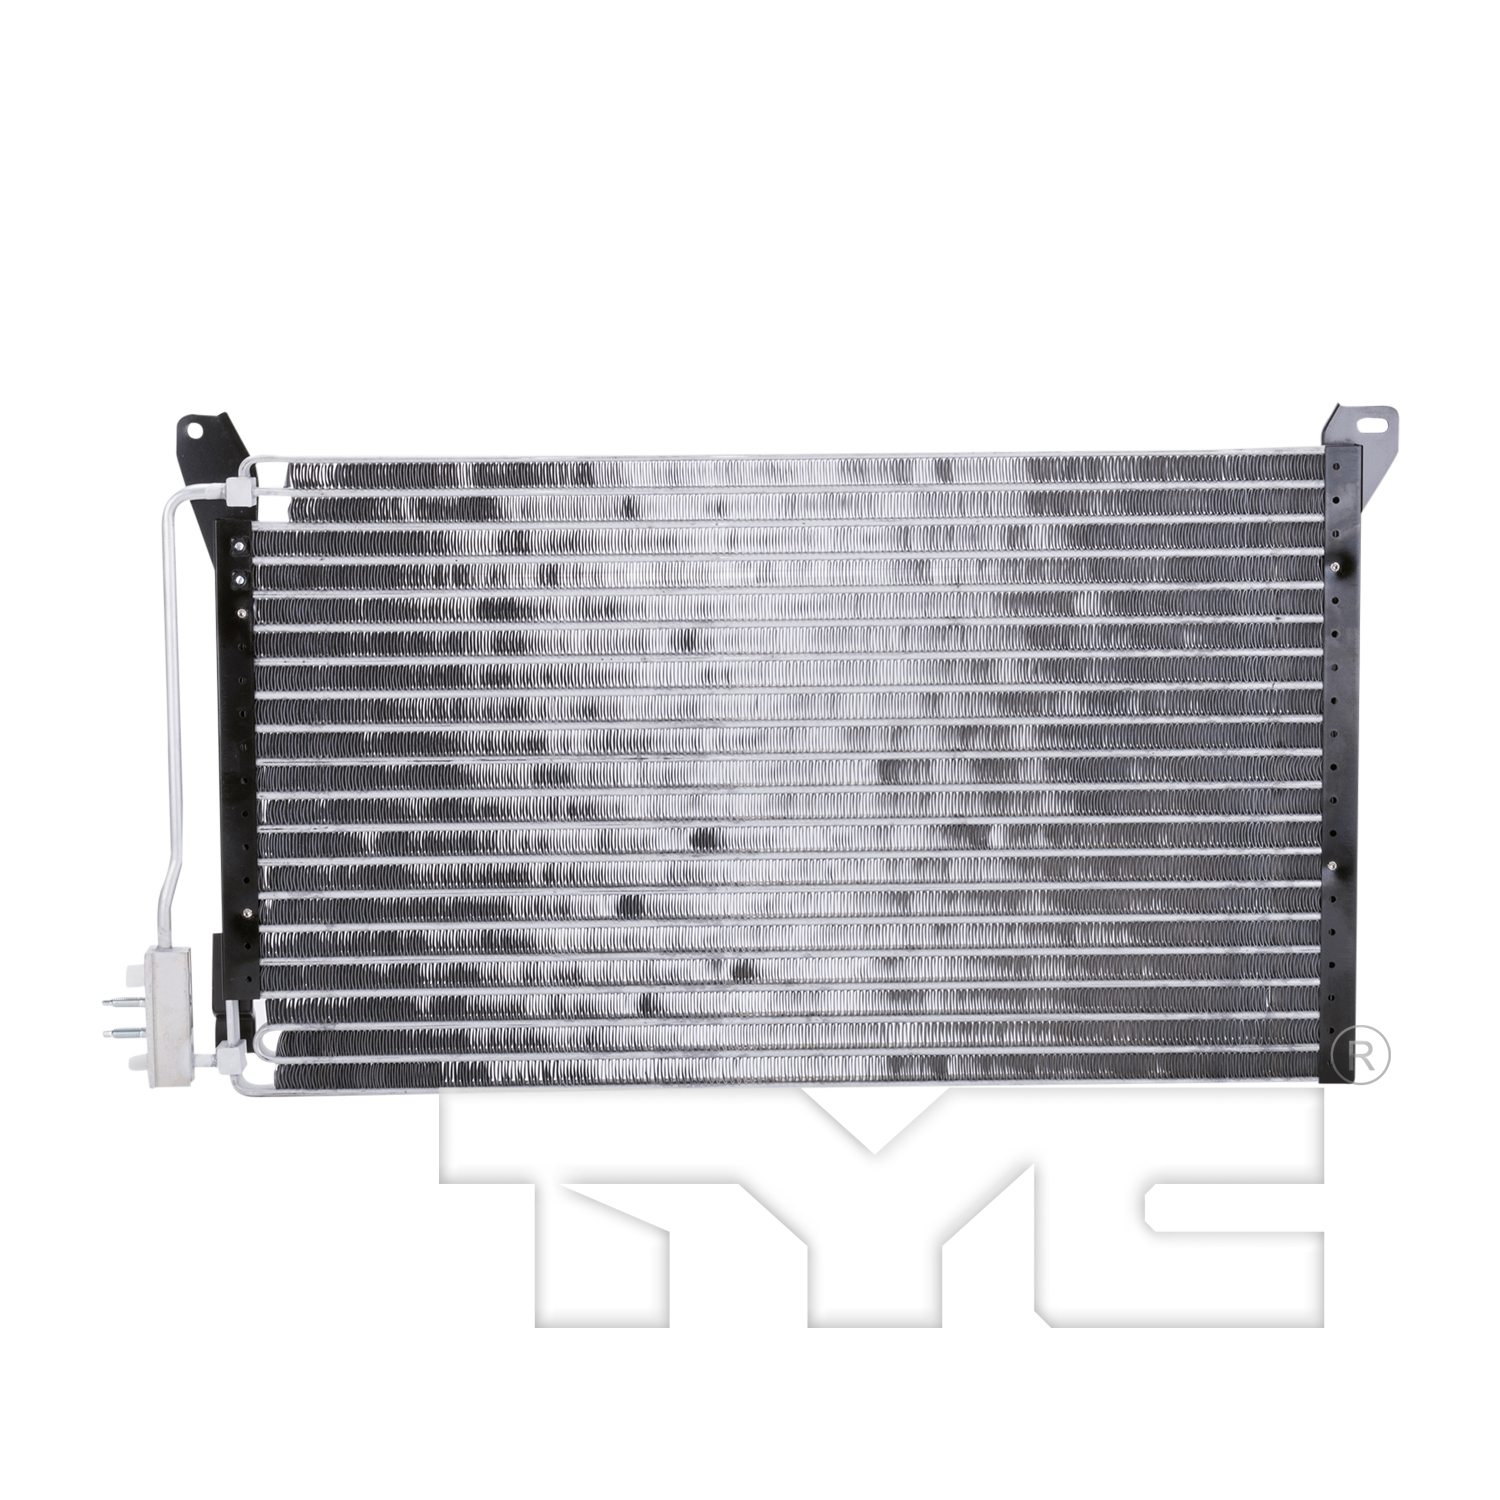 Aftermarket AC CONDENSERS for MERCURY - MONTEGO, FIVE HUN,05-7,COND FROM 3-6-05